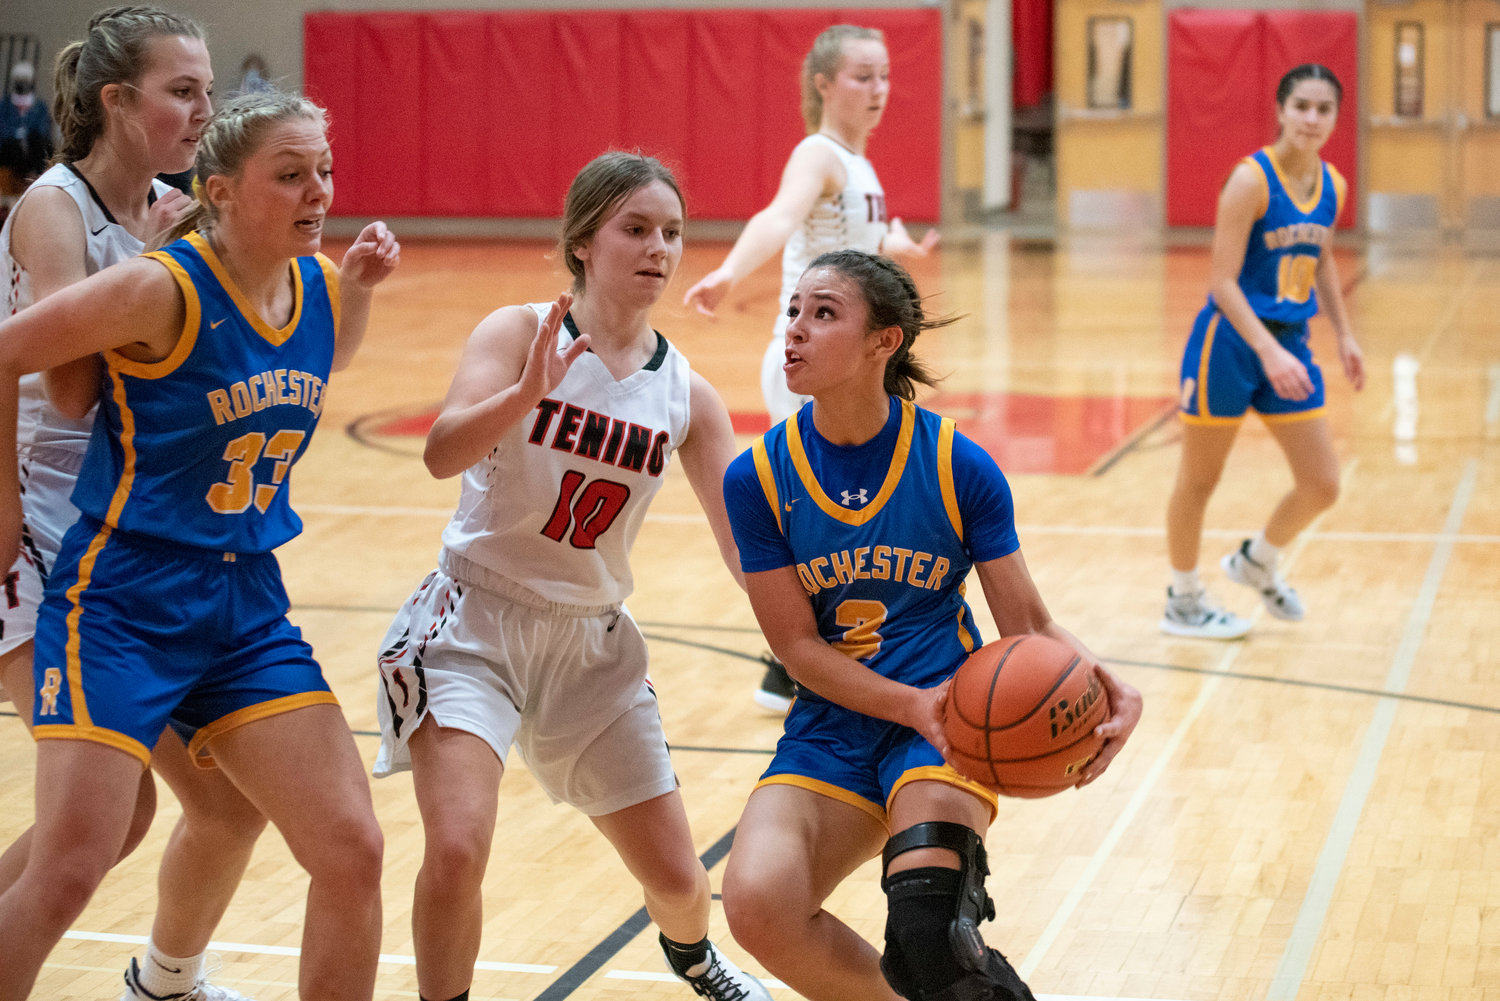 Rochester's Sadie Knutson (3) looks to put up a shot against Tenino on Dec. 2.